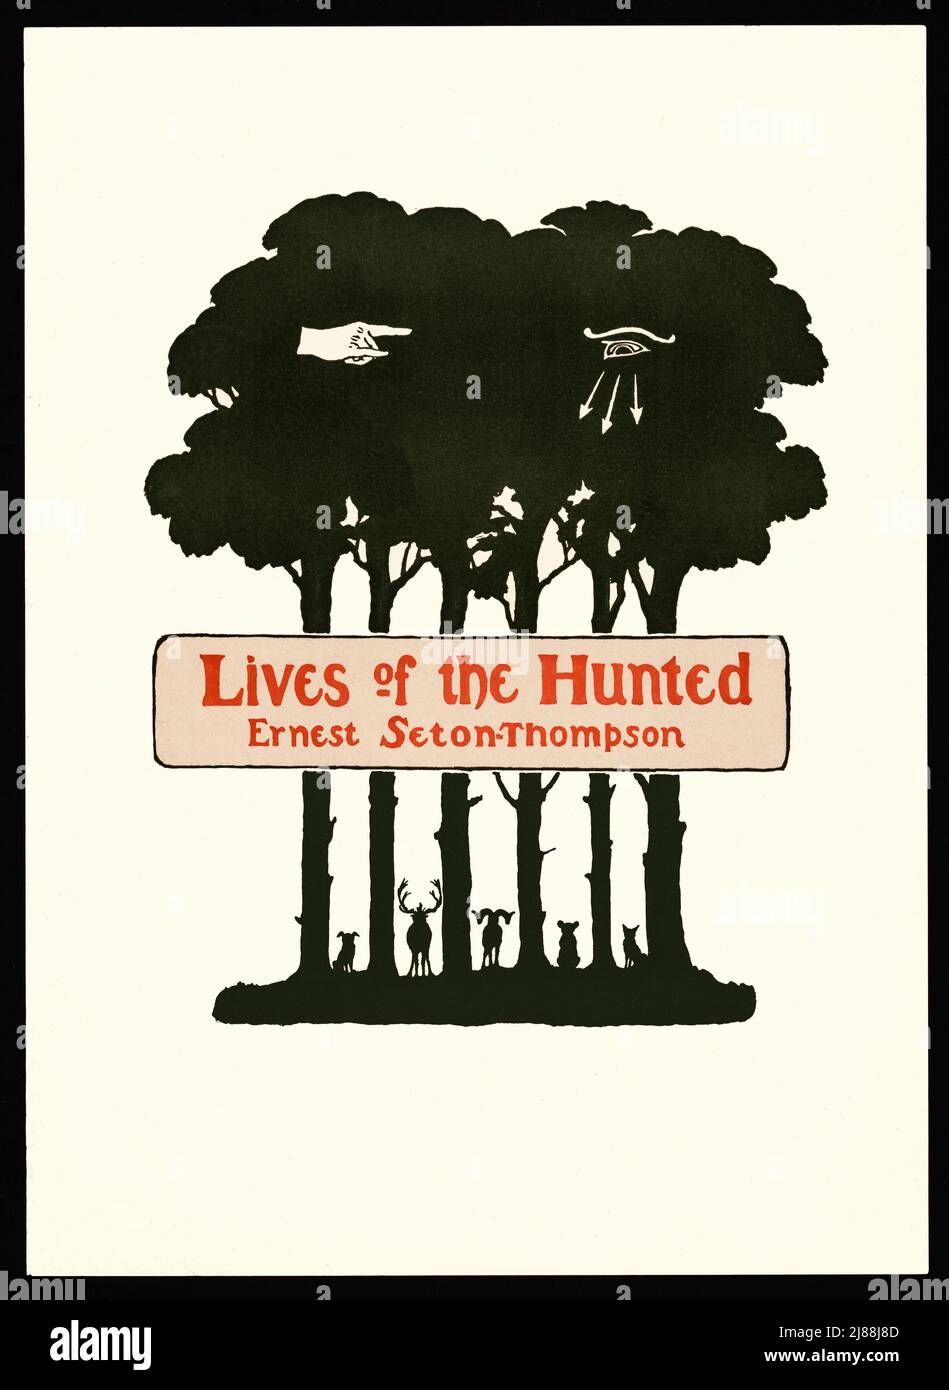 Late 19th century American book cover of 'Lives of the Hunted' by Ernest Seton-Thompson.  The eye represents the spirit of cruelty to animals and the hand for the growing spirit of kindness, acts as a counterbalance. Also known as Black Wolf he was ChiefFounder of the Woodcraft Indians and founding pioneer of the Boy Scouts of America. The artist is unknown. Stock Photo